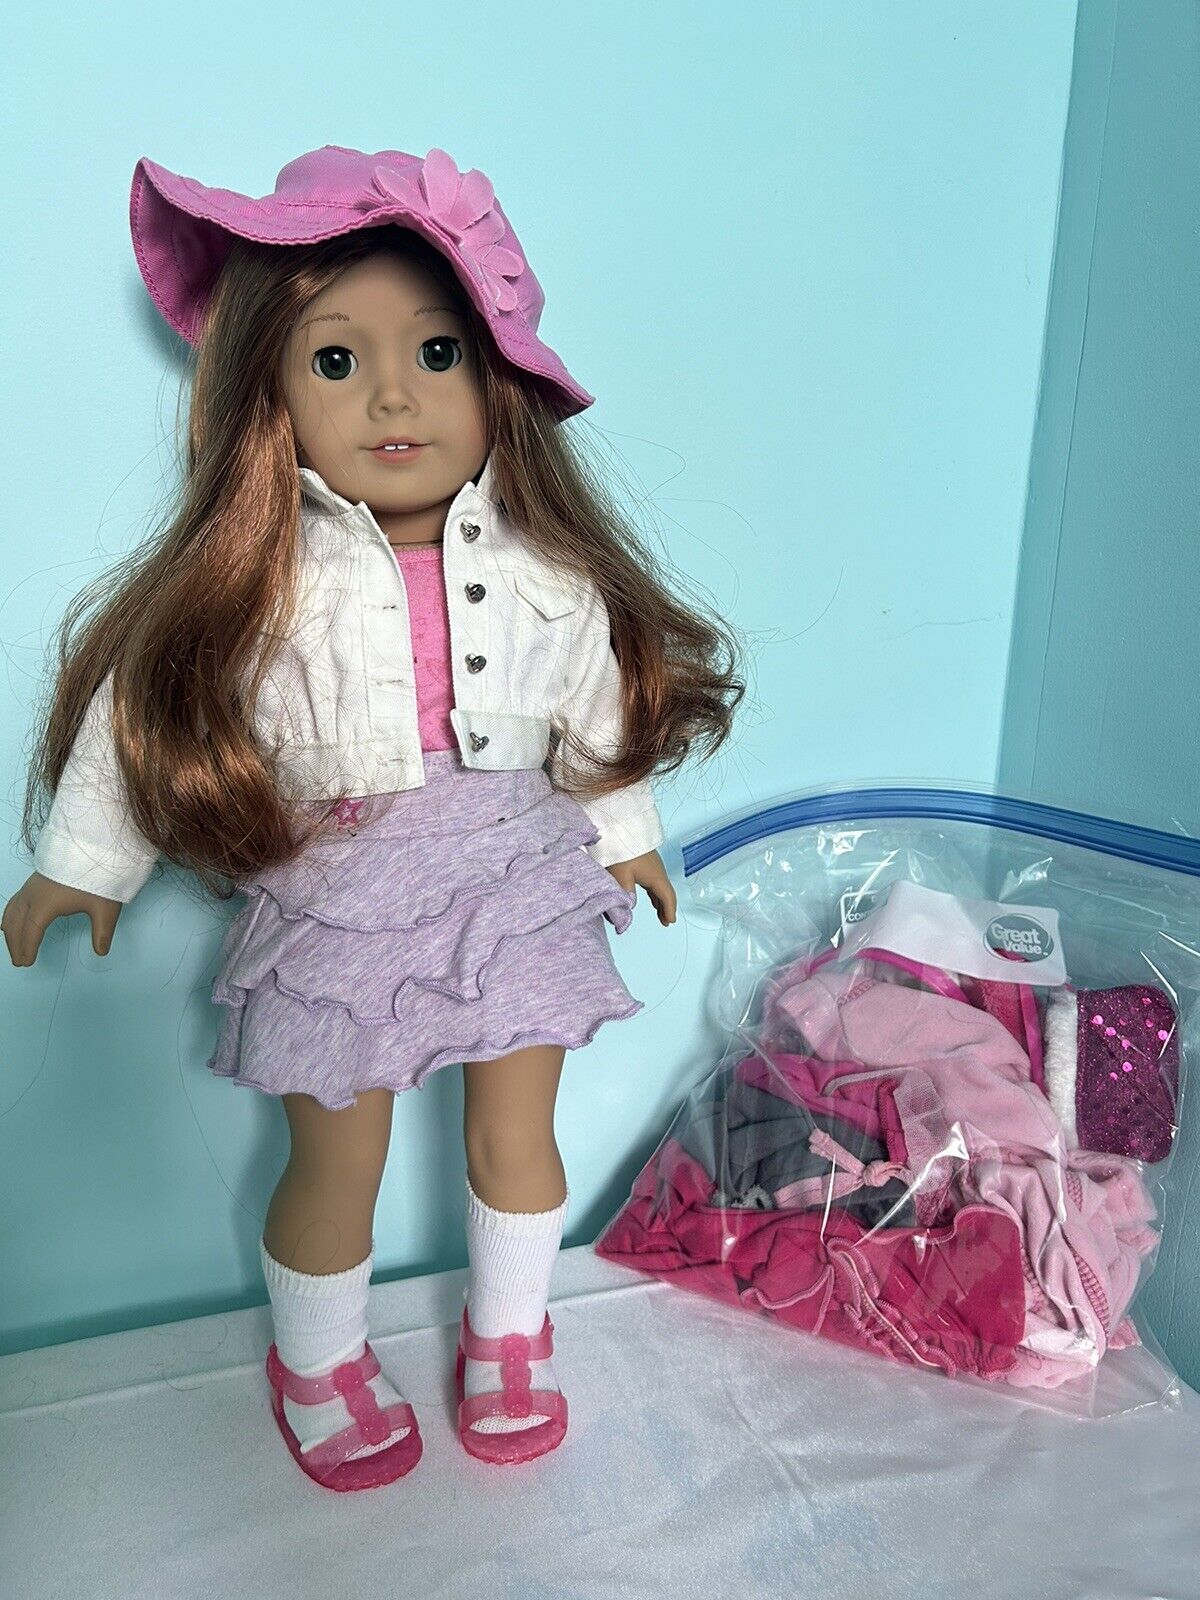 American Girl Truly Me Doll with small accessories and clothing lot